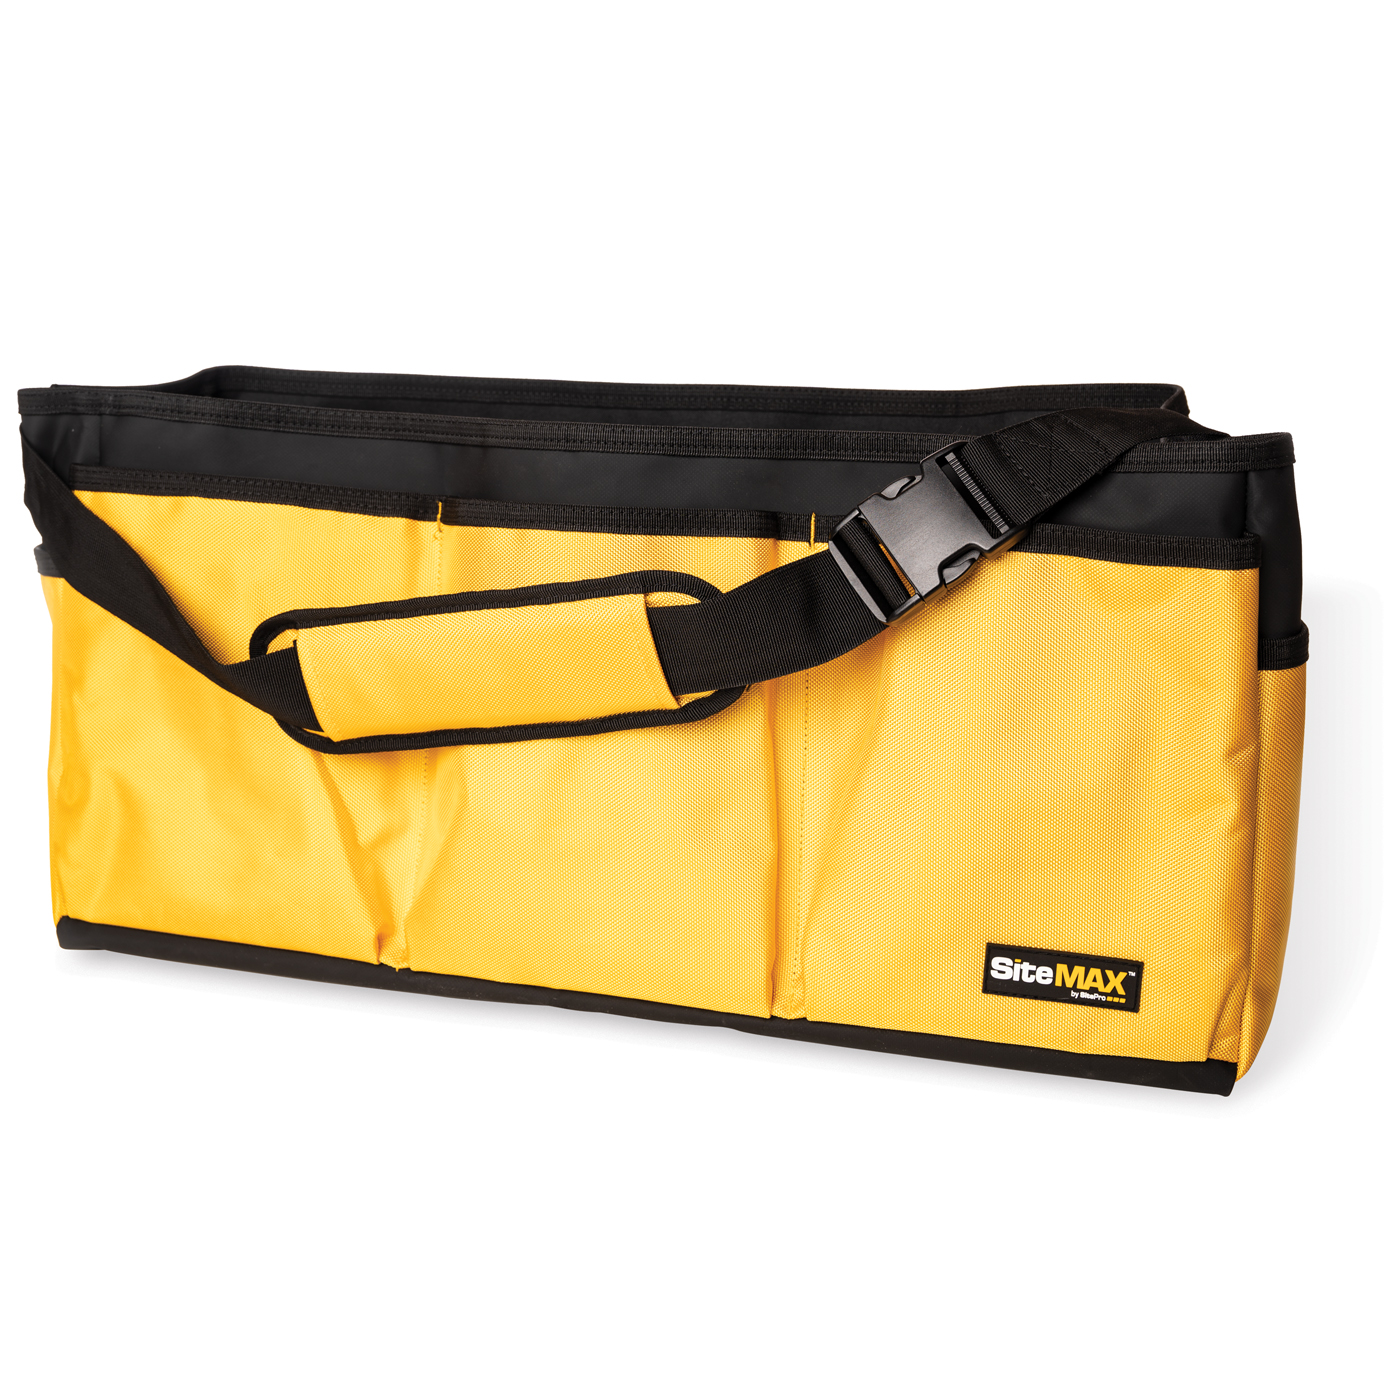 24-In (61cm) Stake Bag with Waterproof Base, SiteMAX Ballistic Picture